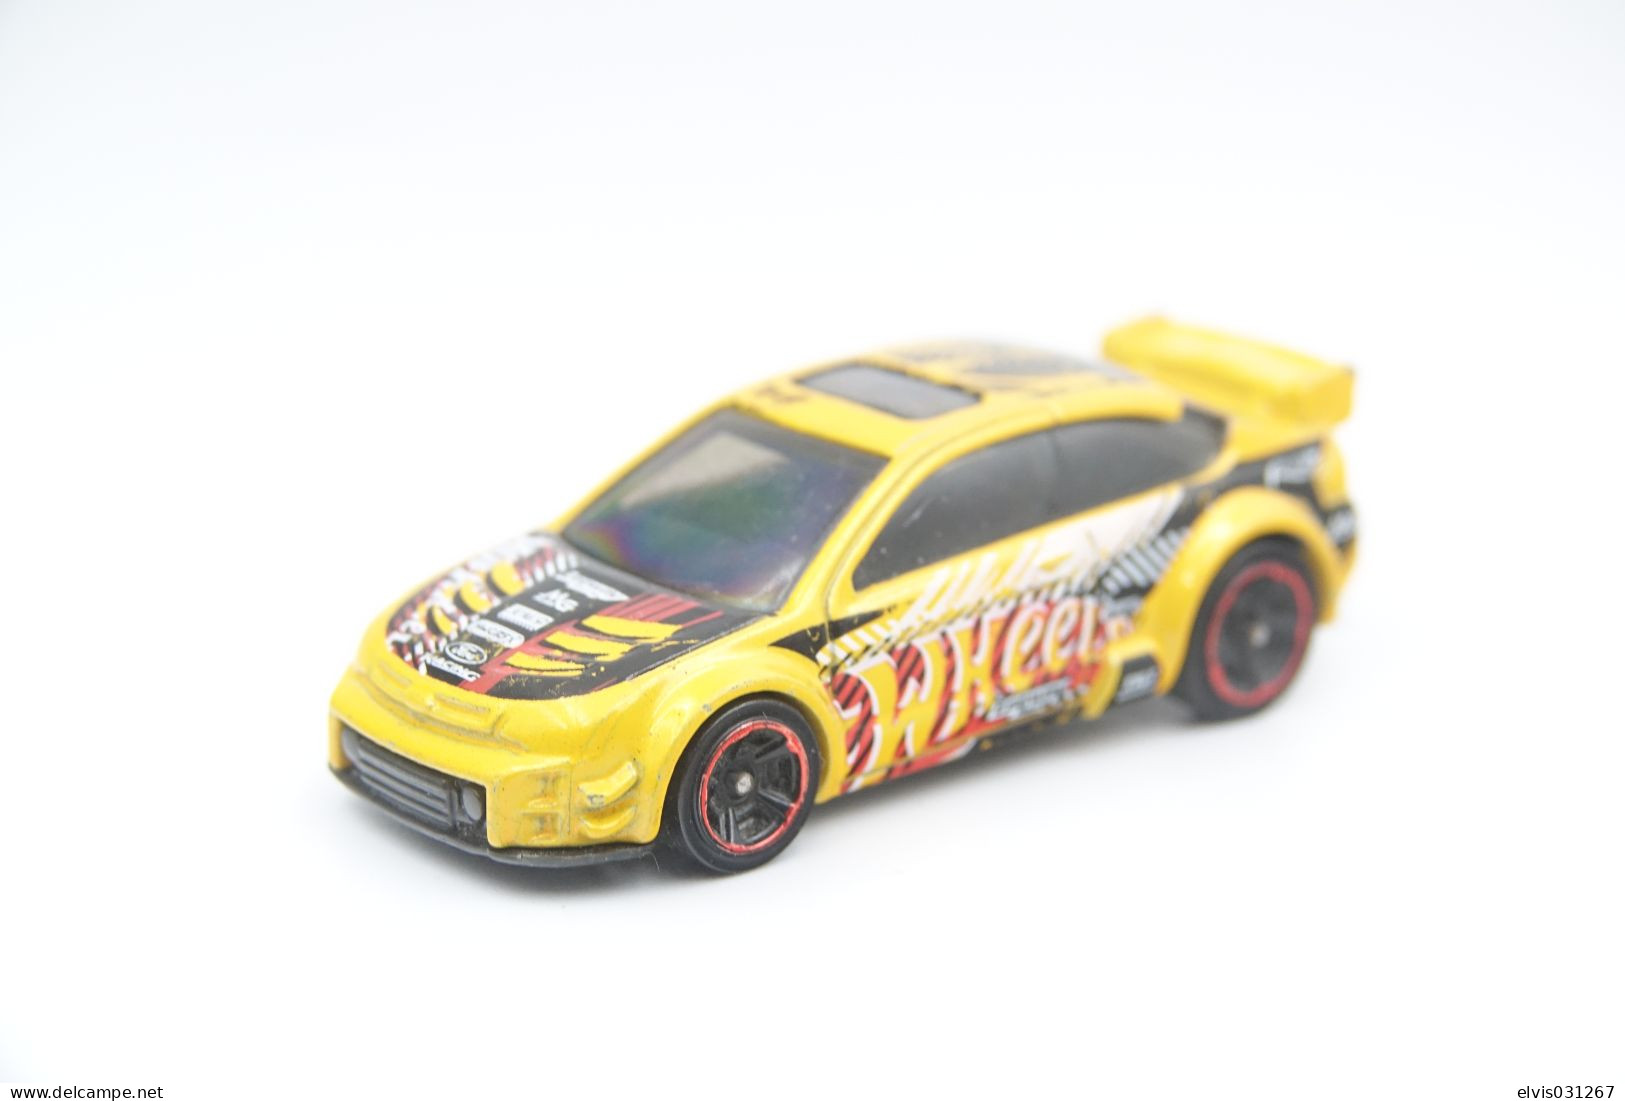 Hot Wheels Mattel '08 Ford Focus -  Issued 2018, Scale 1/64 - Matchbox (Lesney)